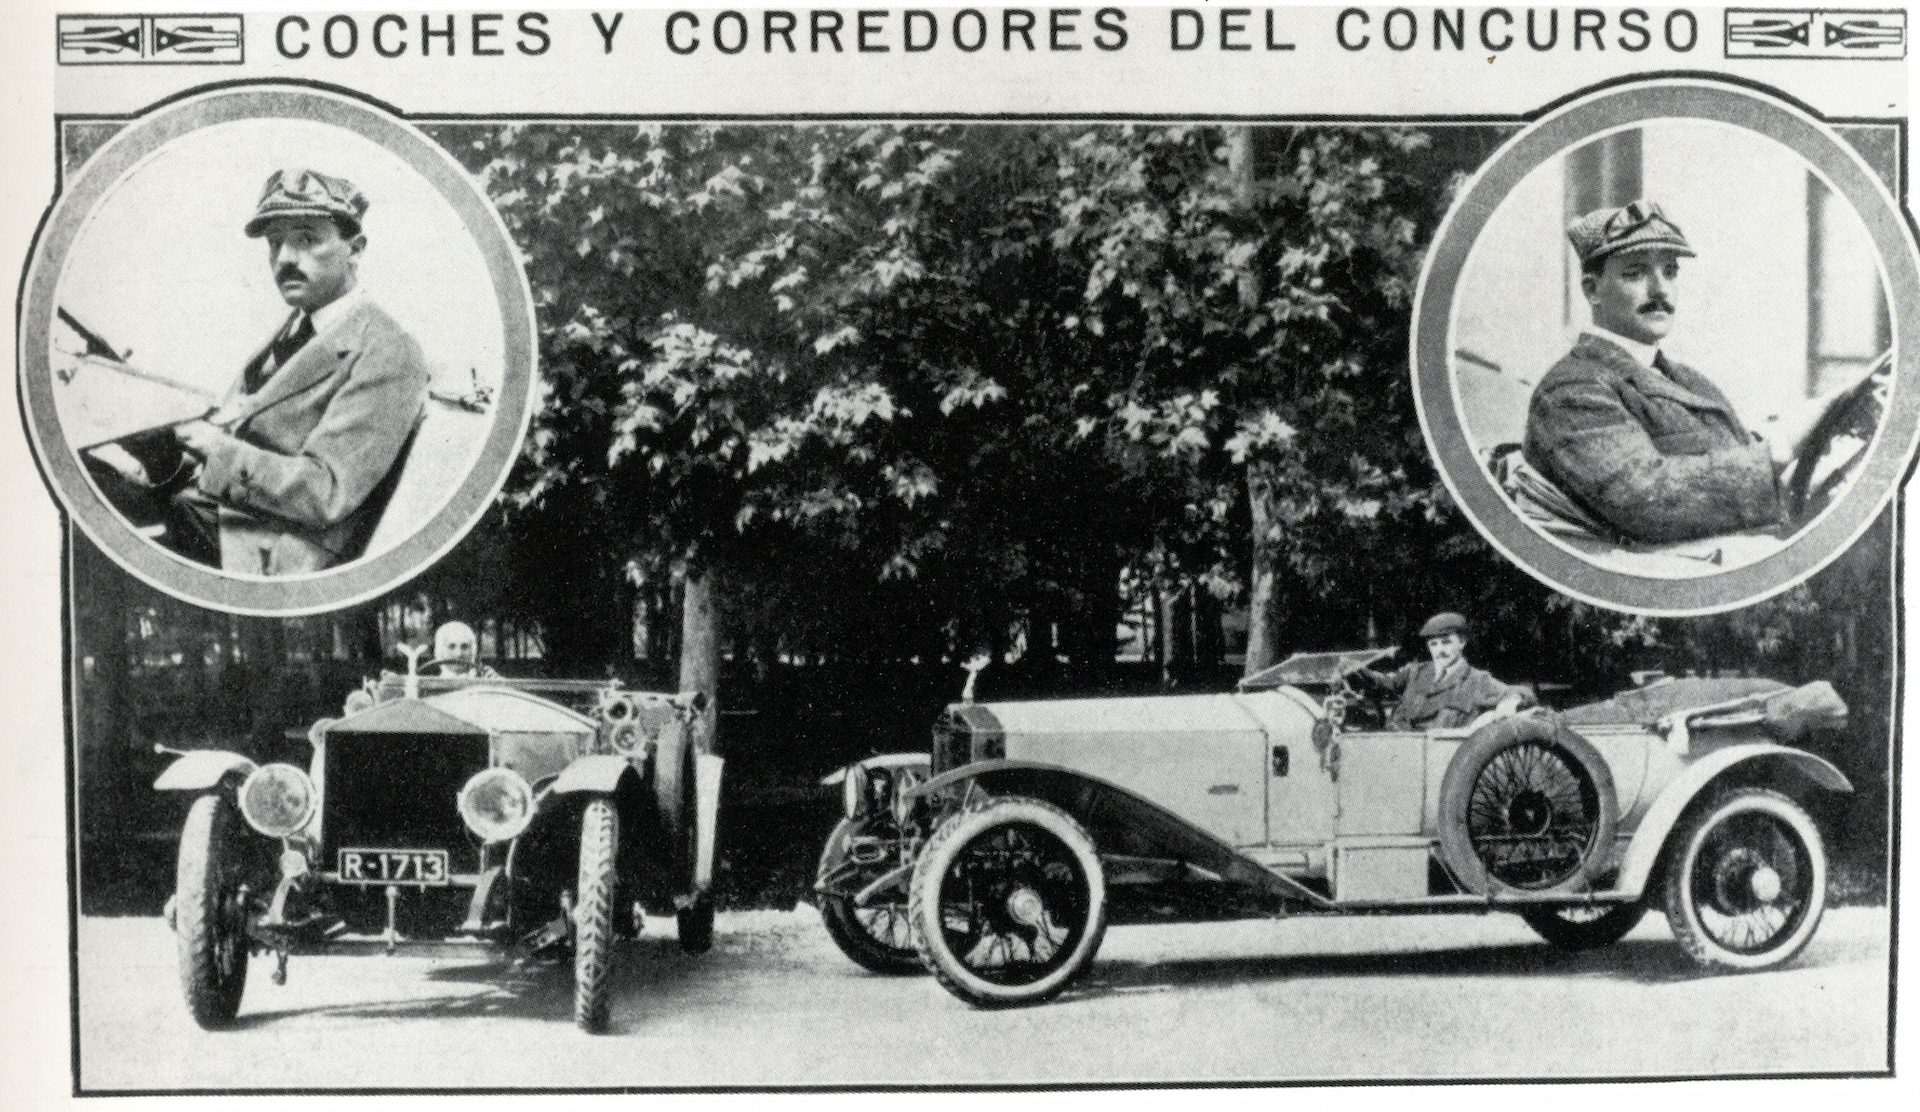 Rolls-Royce marks 110th anniversary of victory at the 1913 Spanish Grand Prix